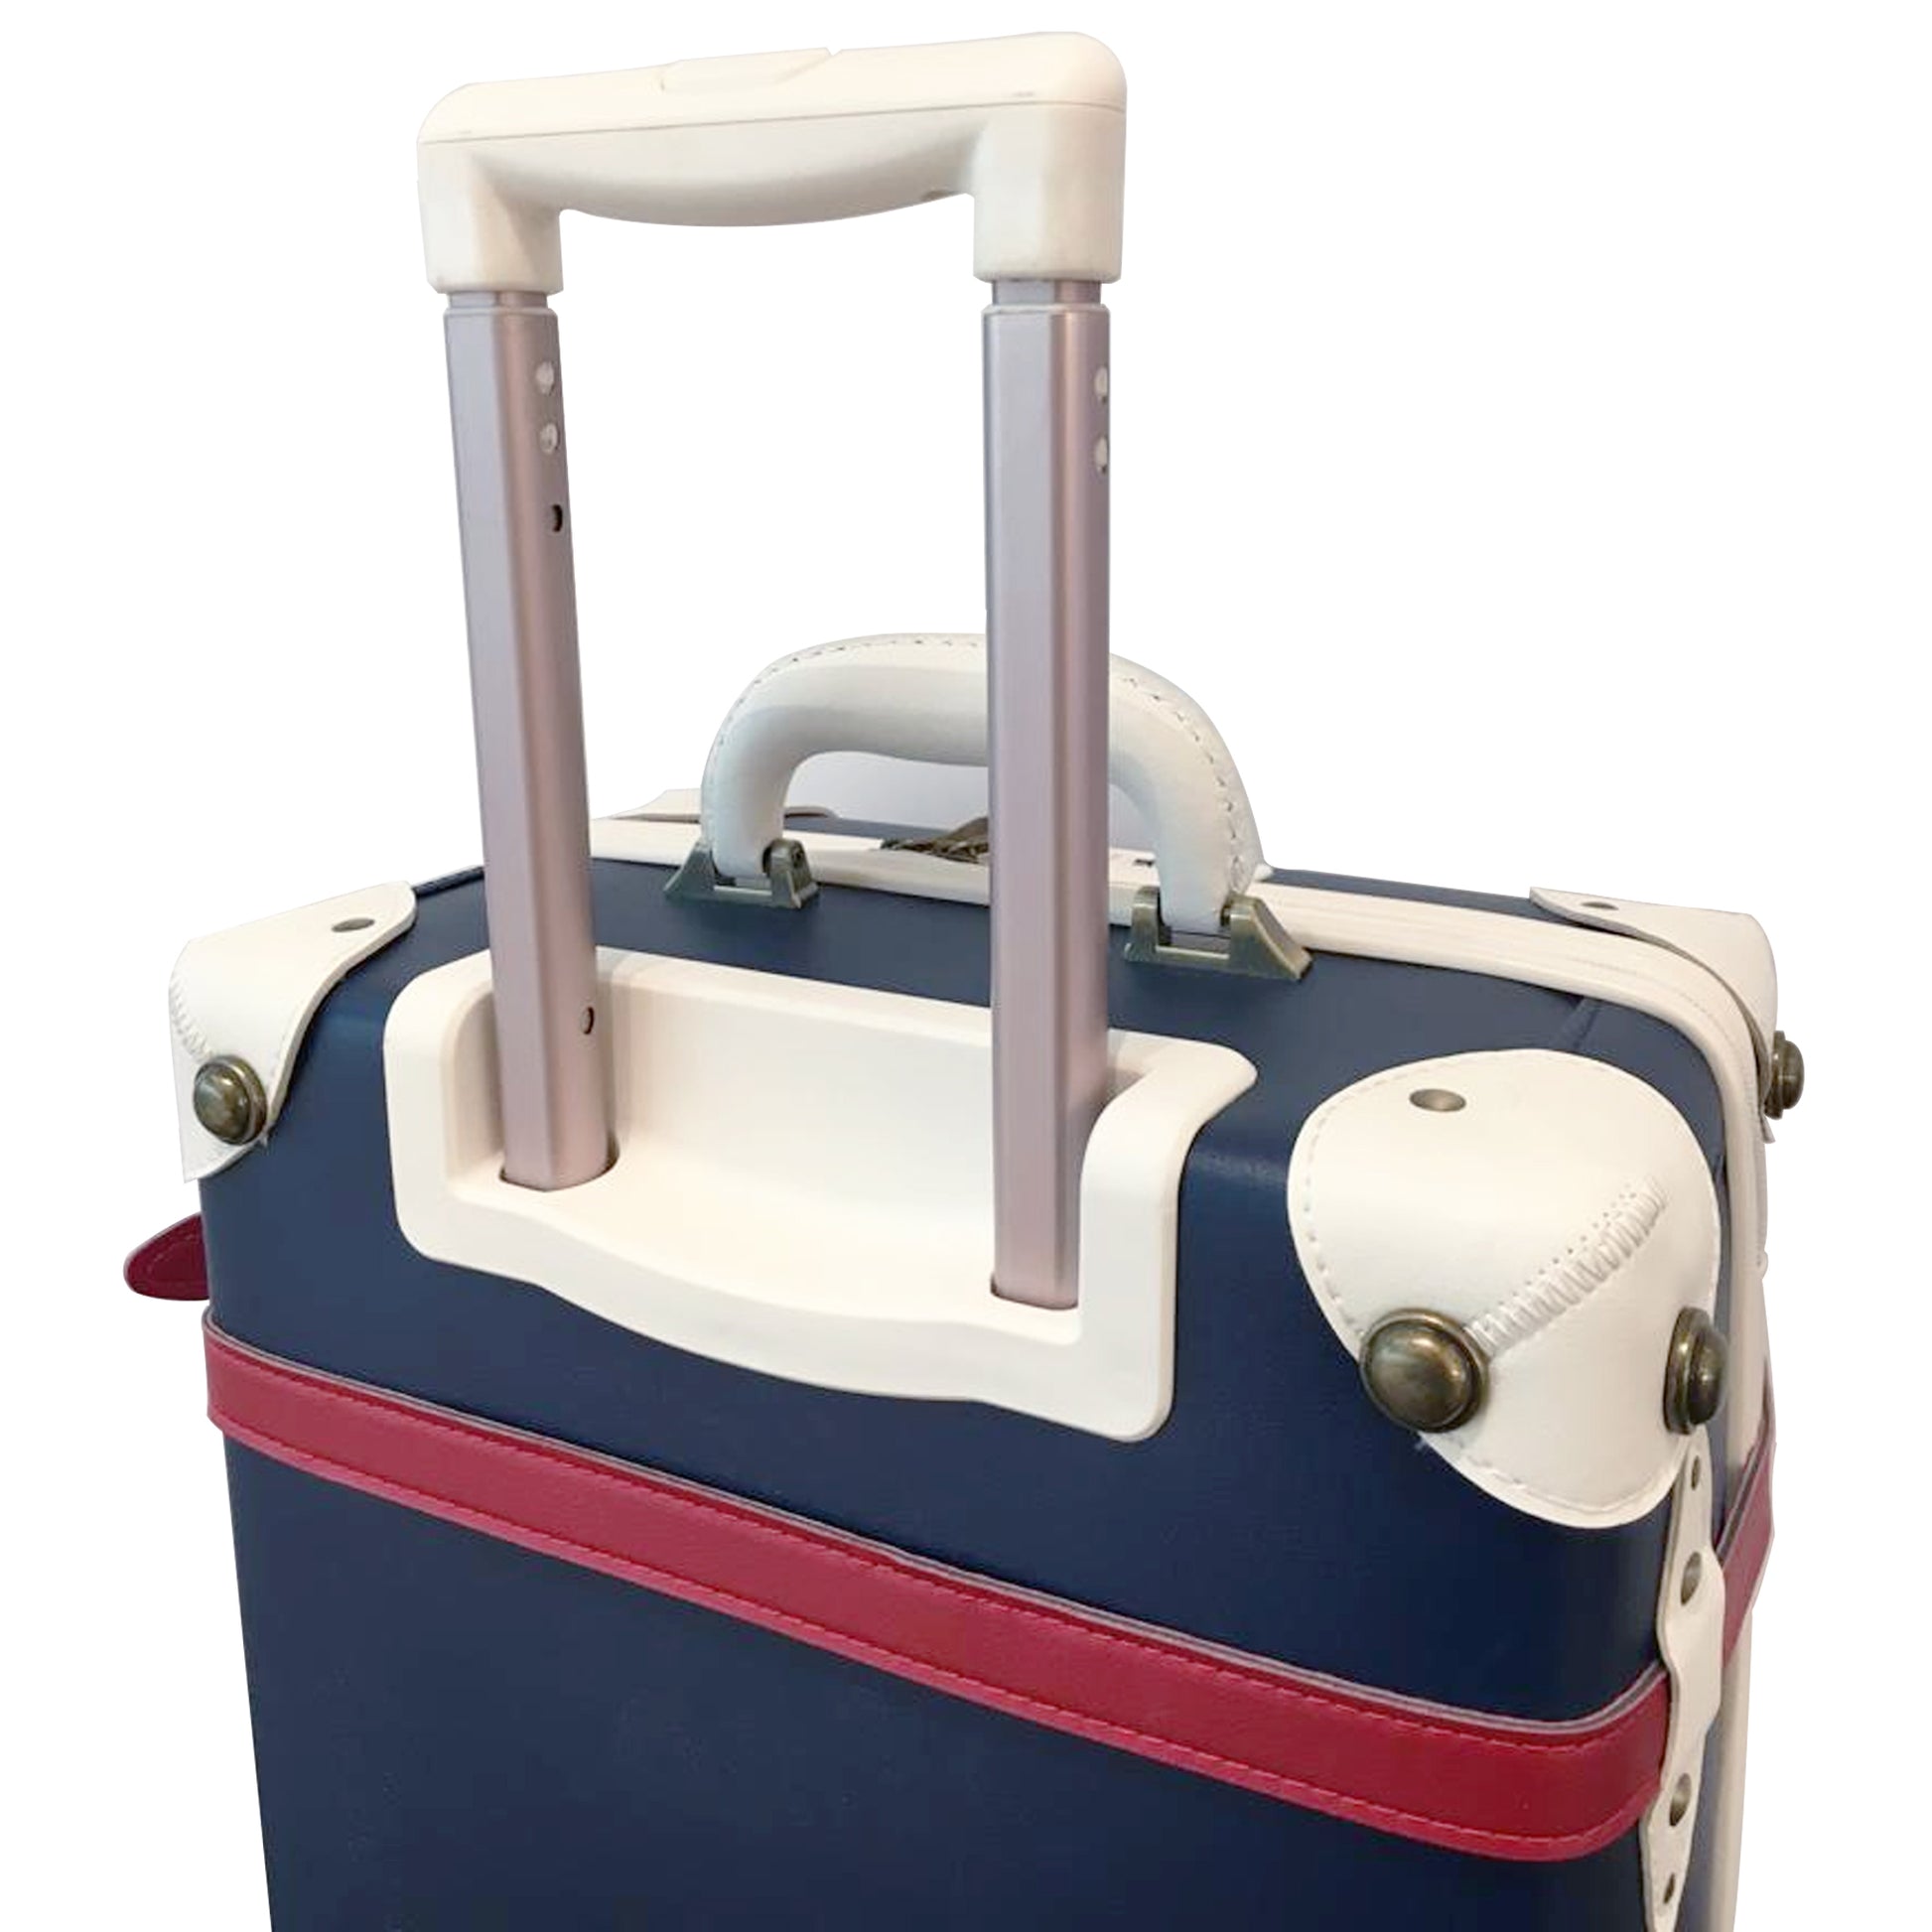 FRENCH, Suitcase, 20 inch